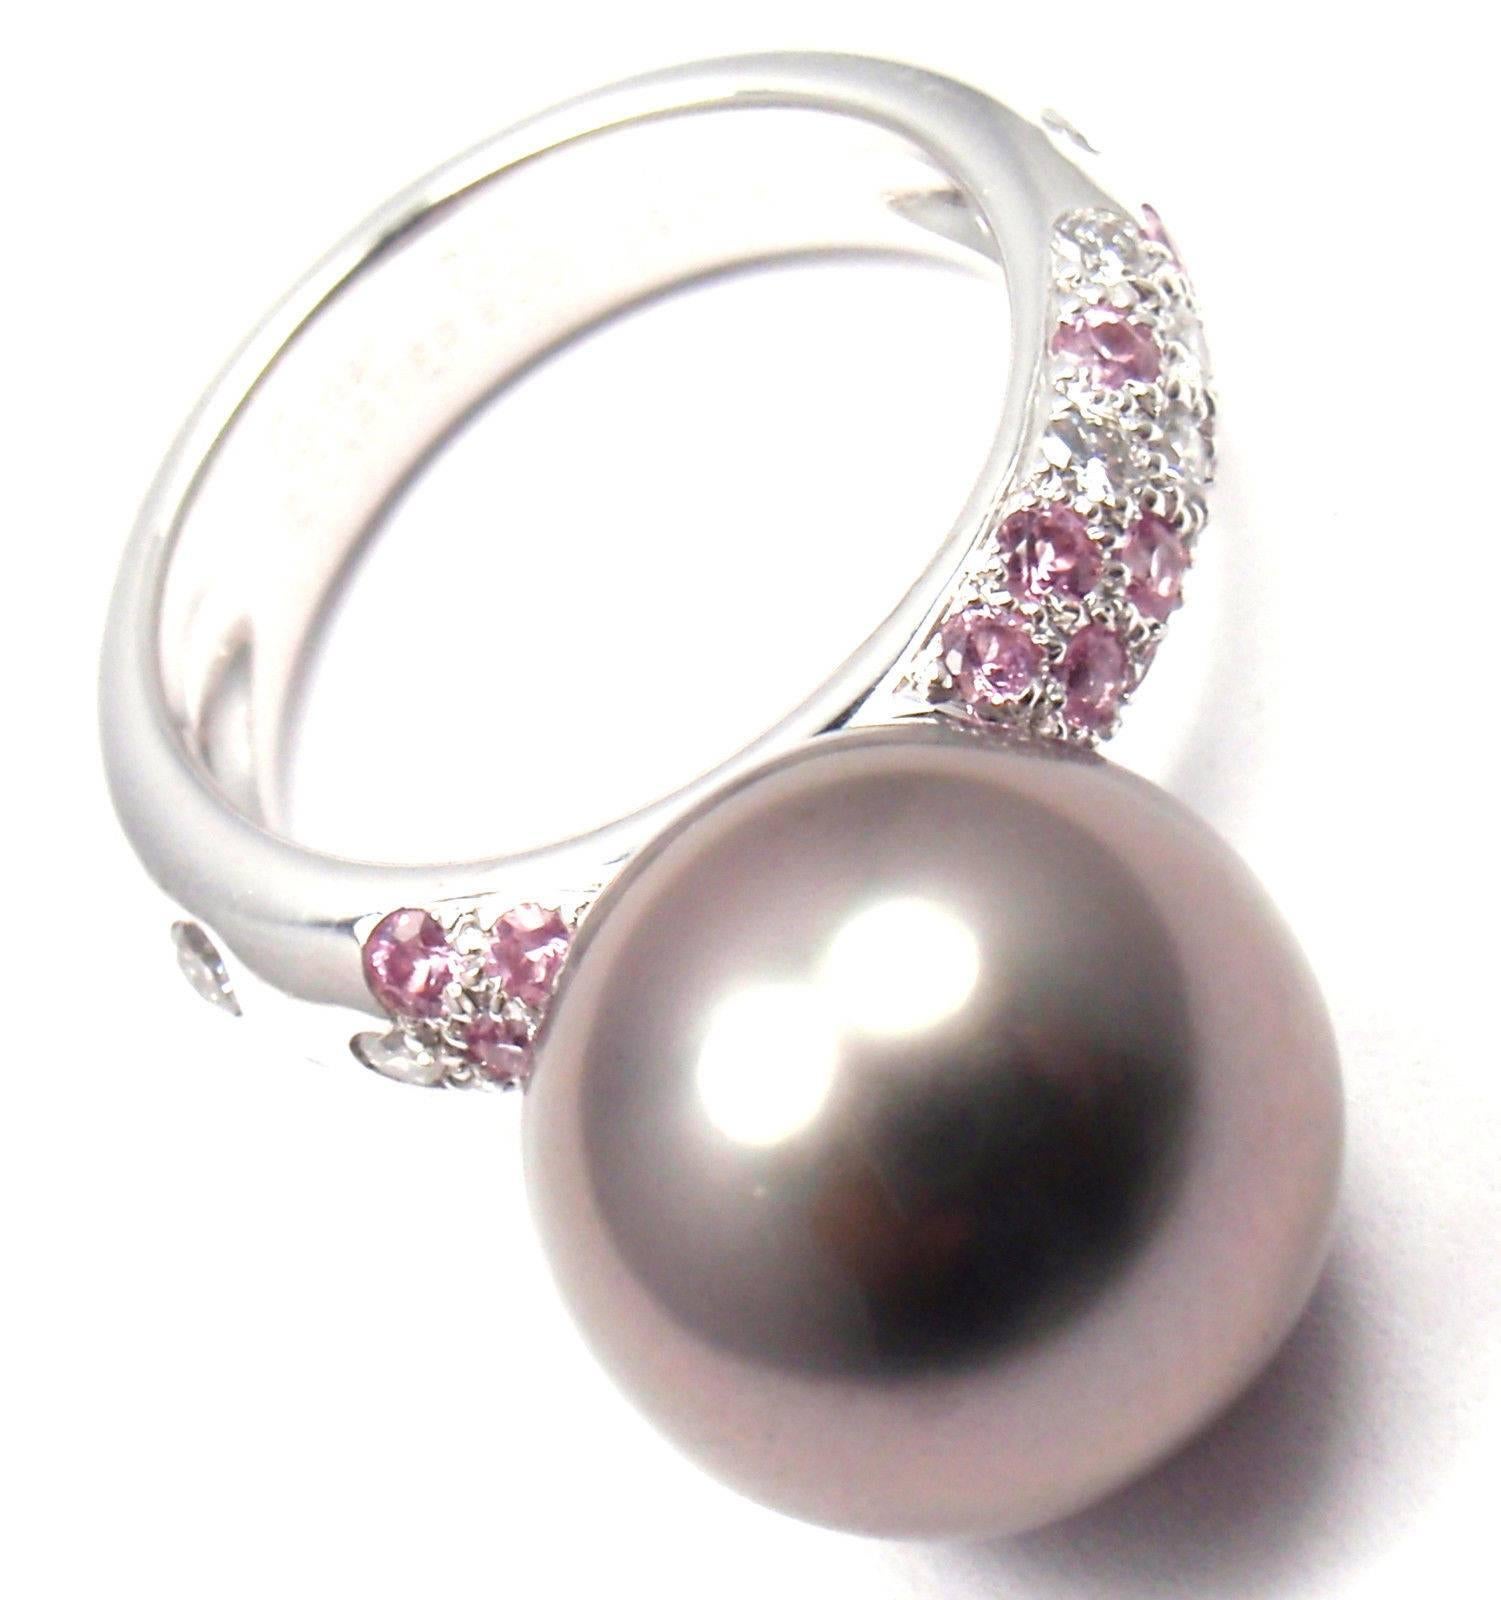 18k White Gold Diamond And Pink Sapphire With Large Tahitian Pearl Ring by Cartier. 
With1 Tahitian pearl 12.5mm
12 round brilliant cut diamonds VS1 clarity, E color total weight approx. .36ct
15 round pink sapphires.
This ring comes with original